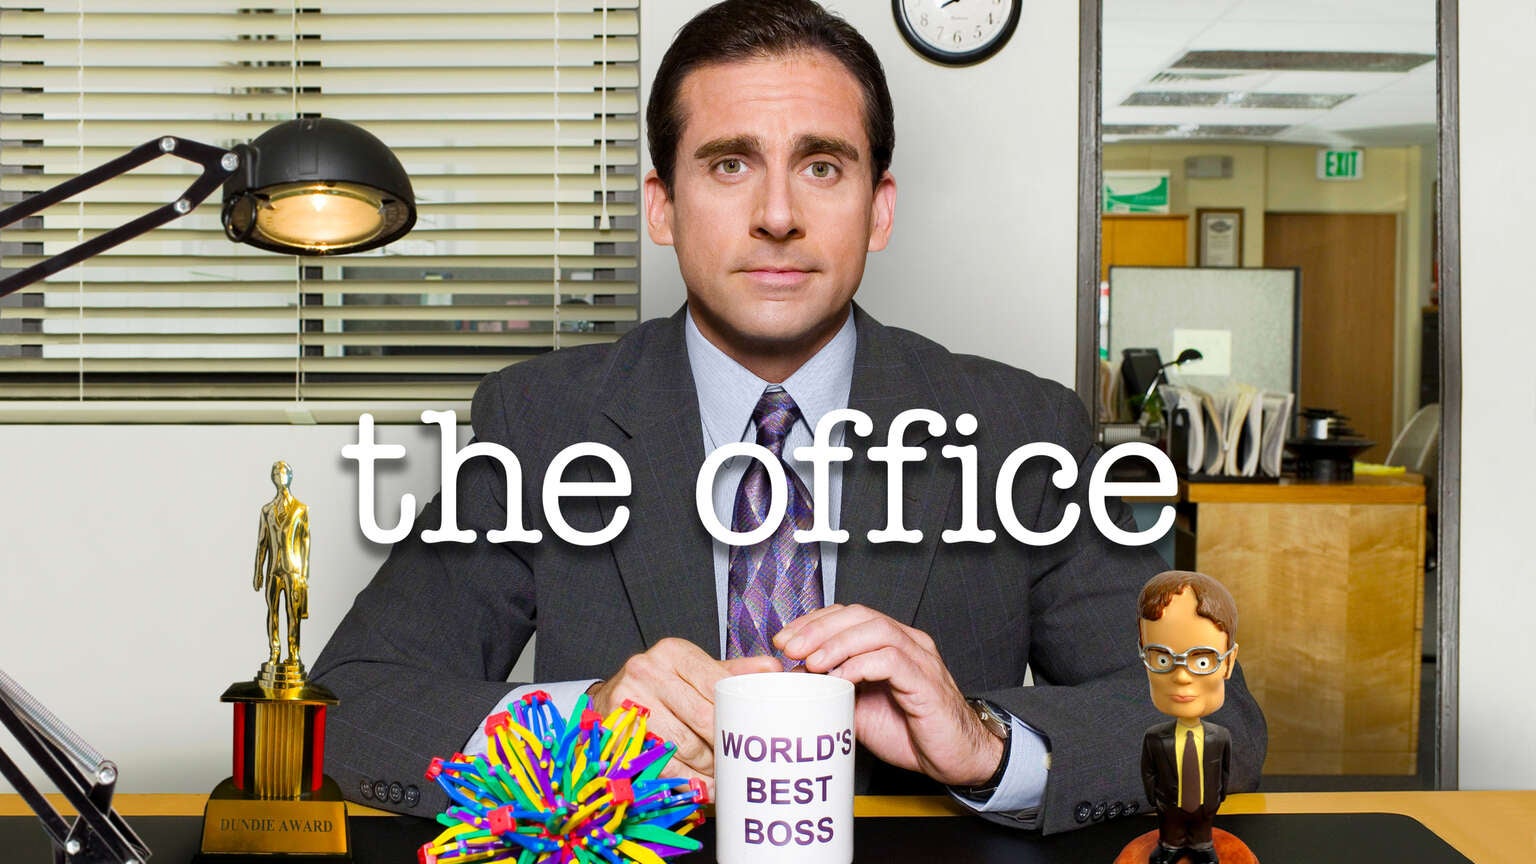 Peacock Reveals Plans for "The Office", First Two Seasons Free